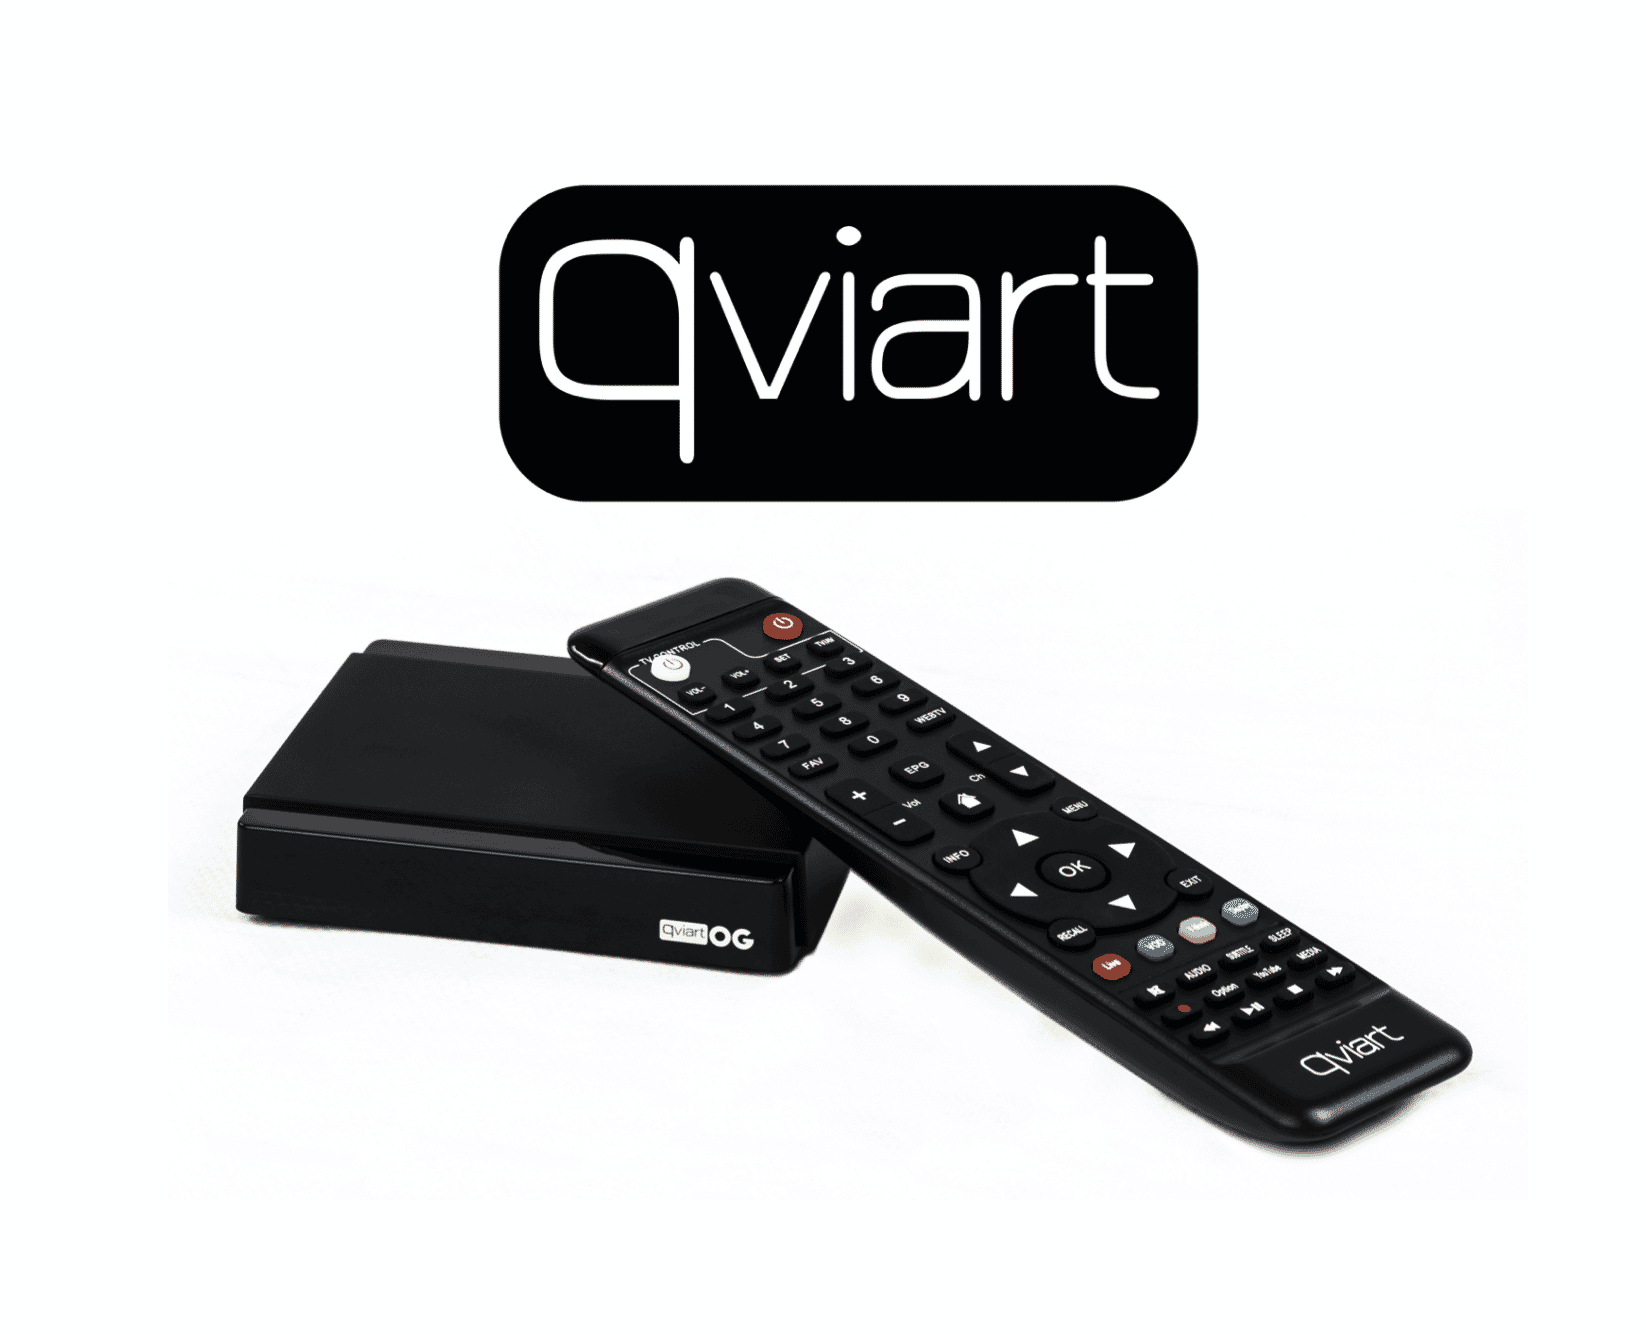 Qviart OG IPTV boks Linux 1080p 60fps H.265Qviart OG is a powerful stable, fast and user-friendly Linux OTT 1080p 60fps H.265 box for those who want things simple and effective in an affordable IPTV receiver.  The state of the art QTV Online TV (stalker) Application offers the greatest TV experience in an IPTV set top box, it brings even more functions than your old Satellite or Cable receiver. Xtream, M3U and more IPTV functions guarantee fullest IPTV experience within a little but powerful box.QVIART LUNIX